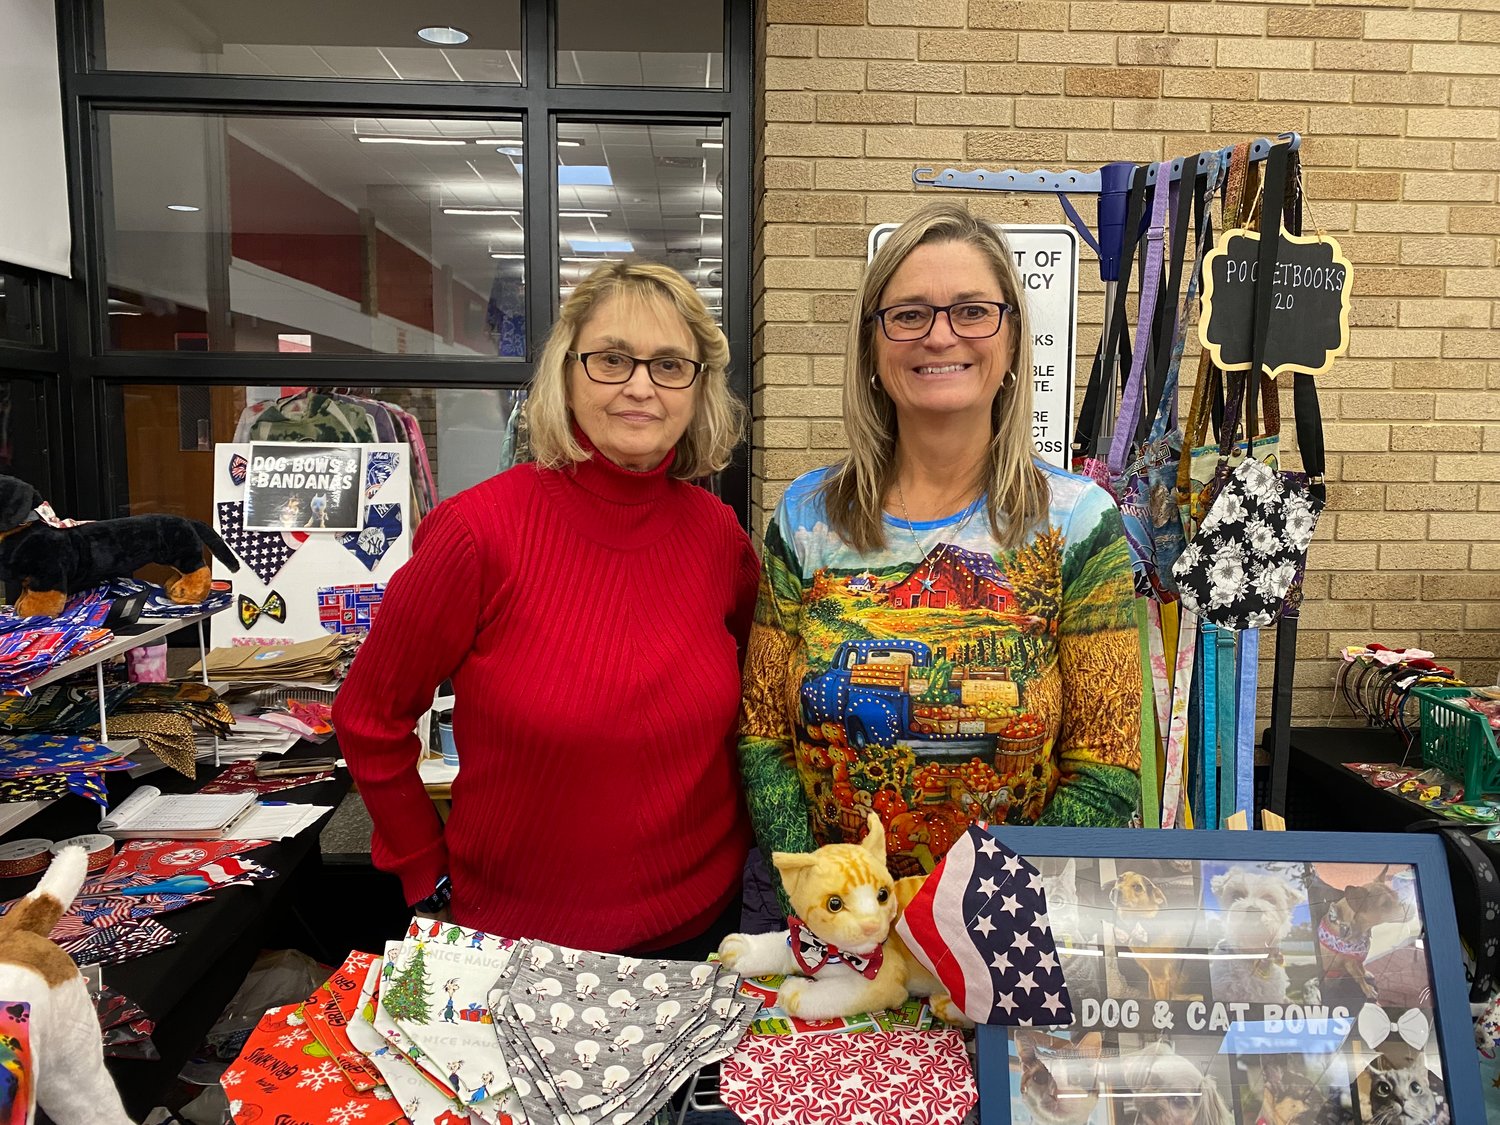 The ladies of Lorands Treasures with their many goods that include bow ties for dogs and cats, kids’ bows, bandanas and more. Follow them on Instagram at @lorandstreasures.